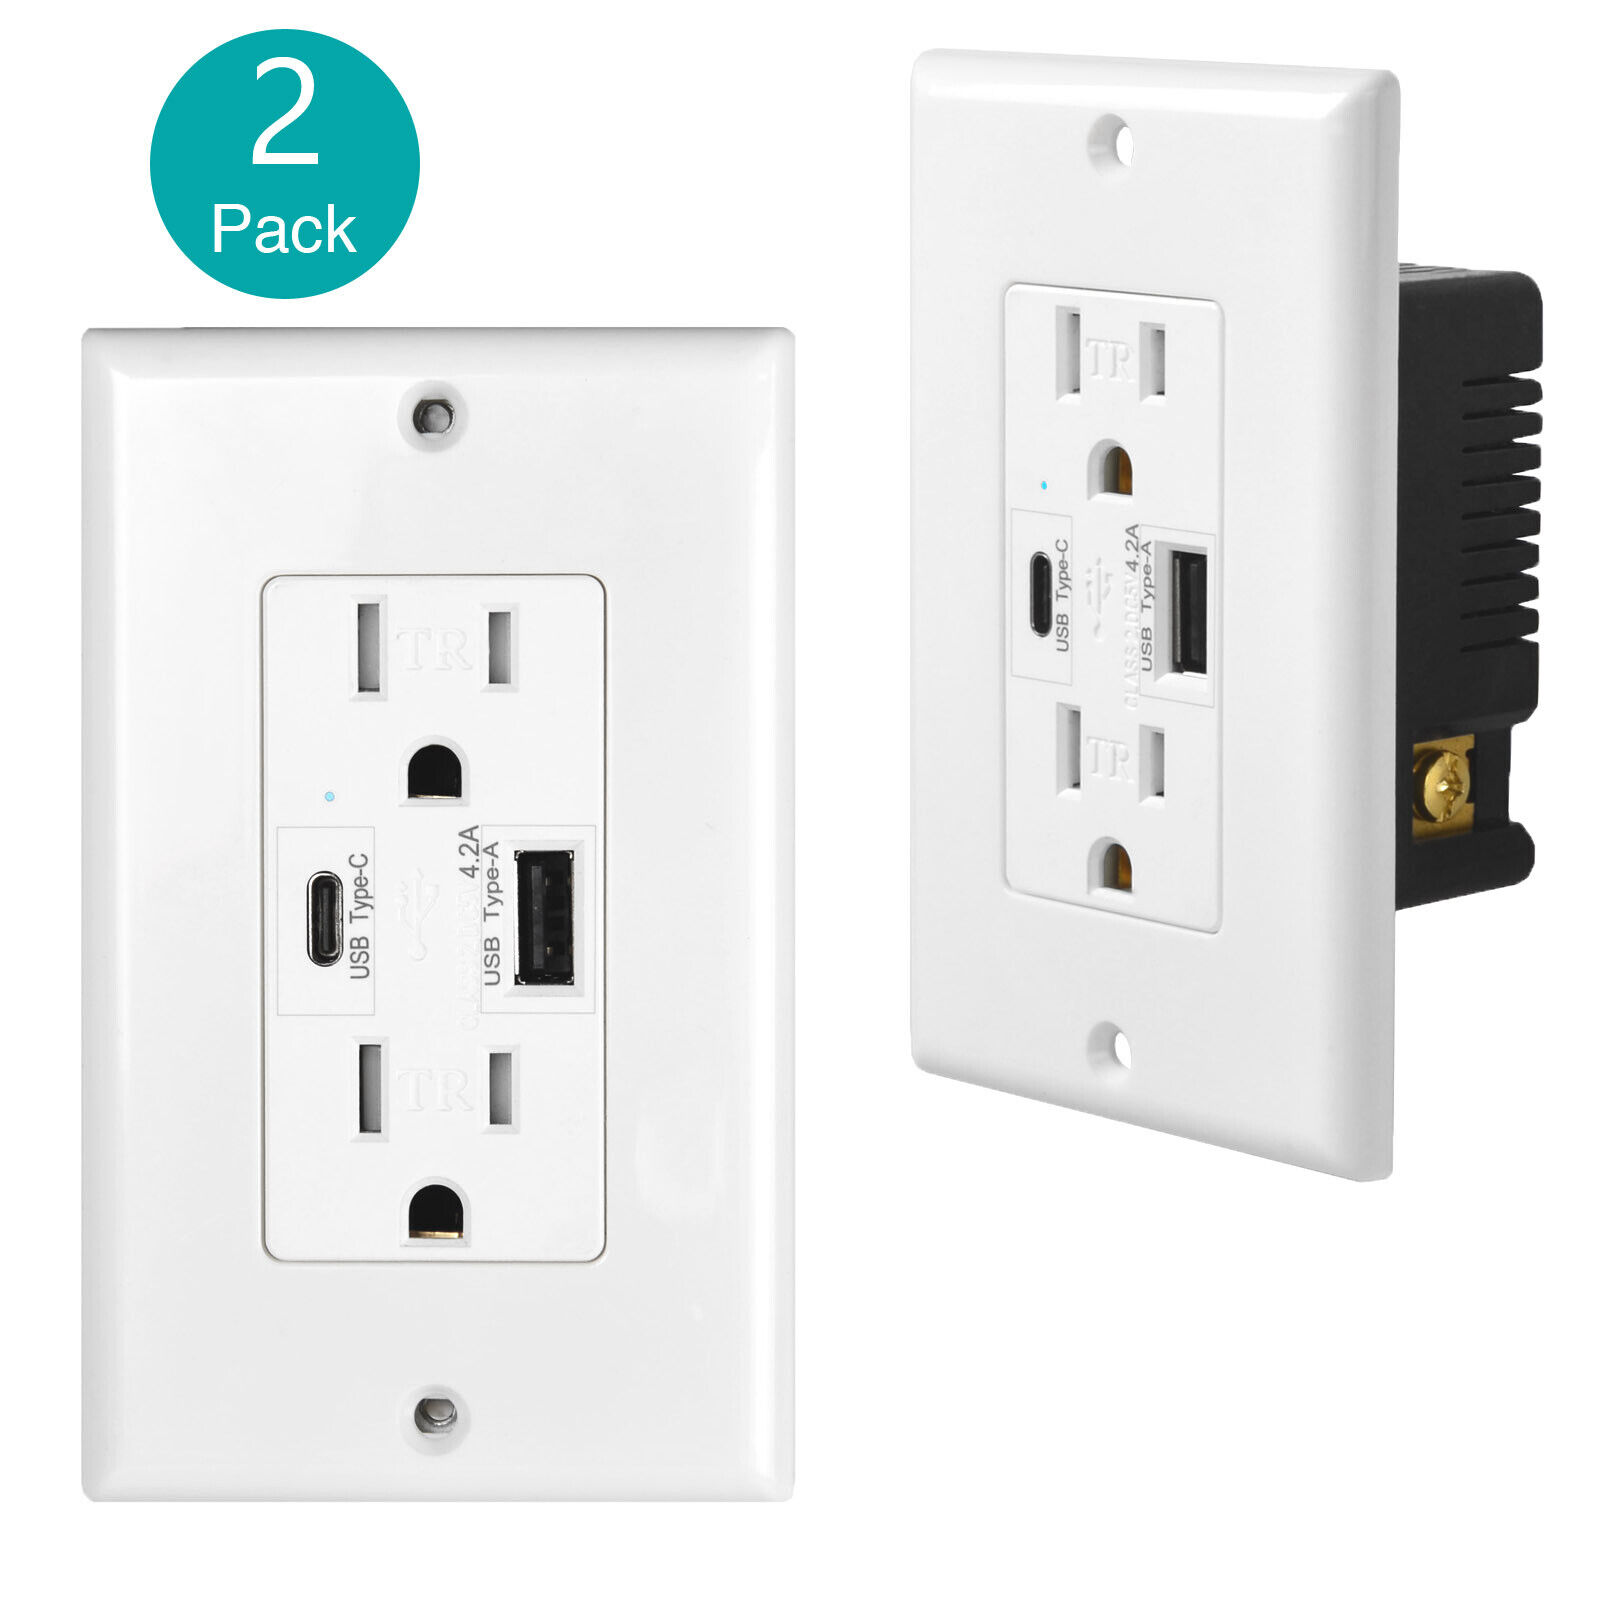 2PK 4.2A Dual USB Type-C Charger 15A Duplex Receptacle Wall Charger Power Outlet